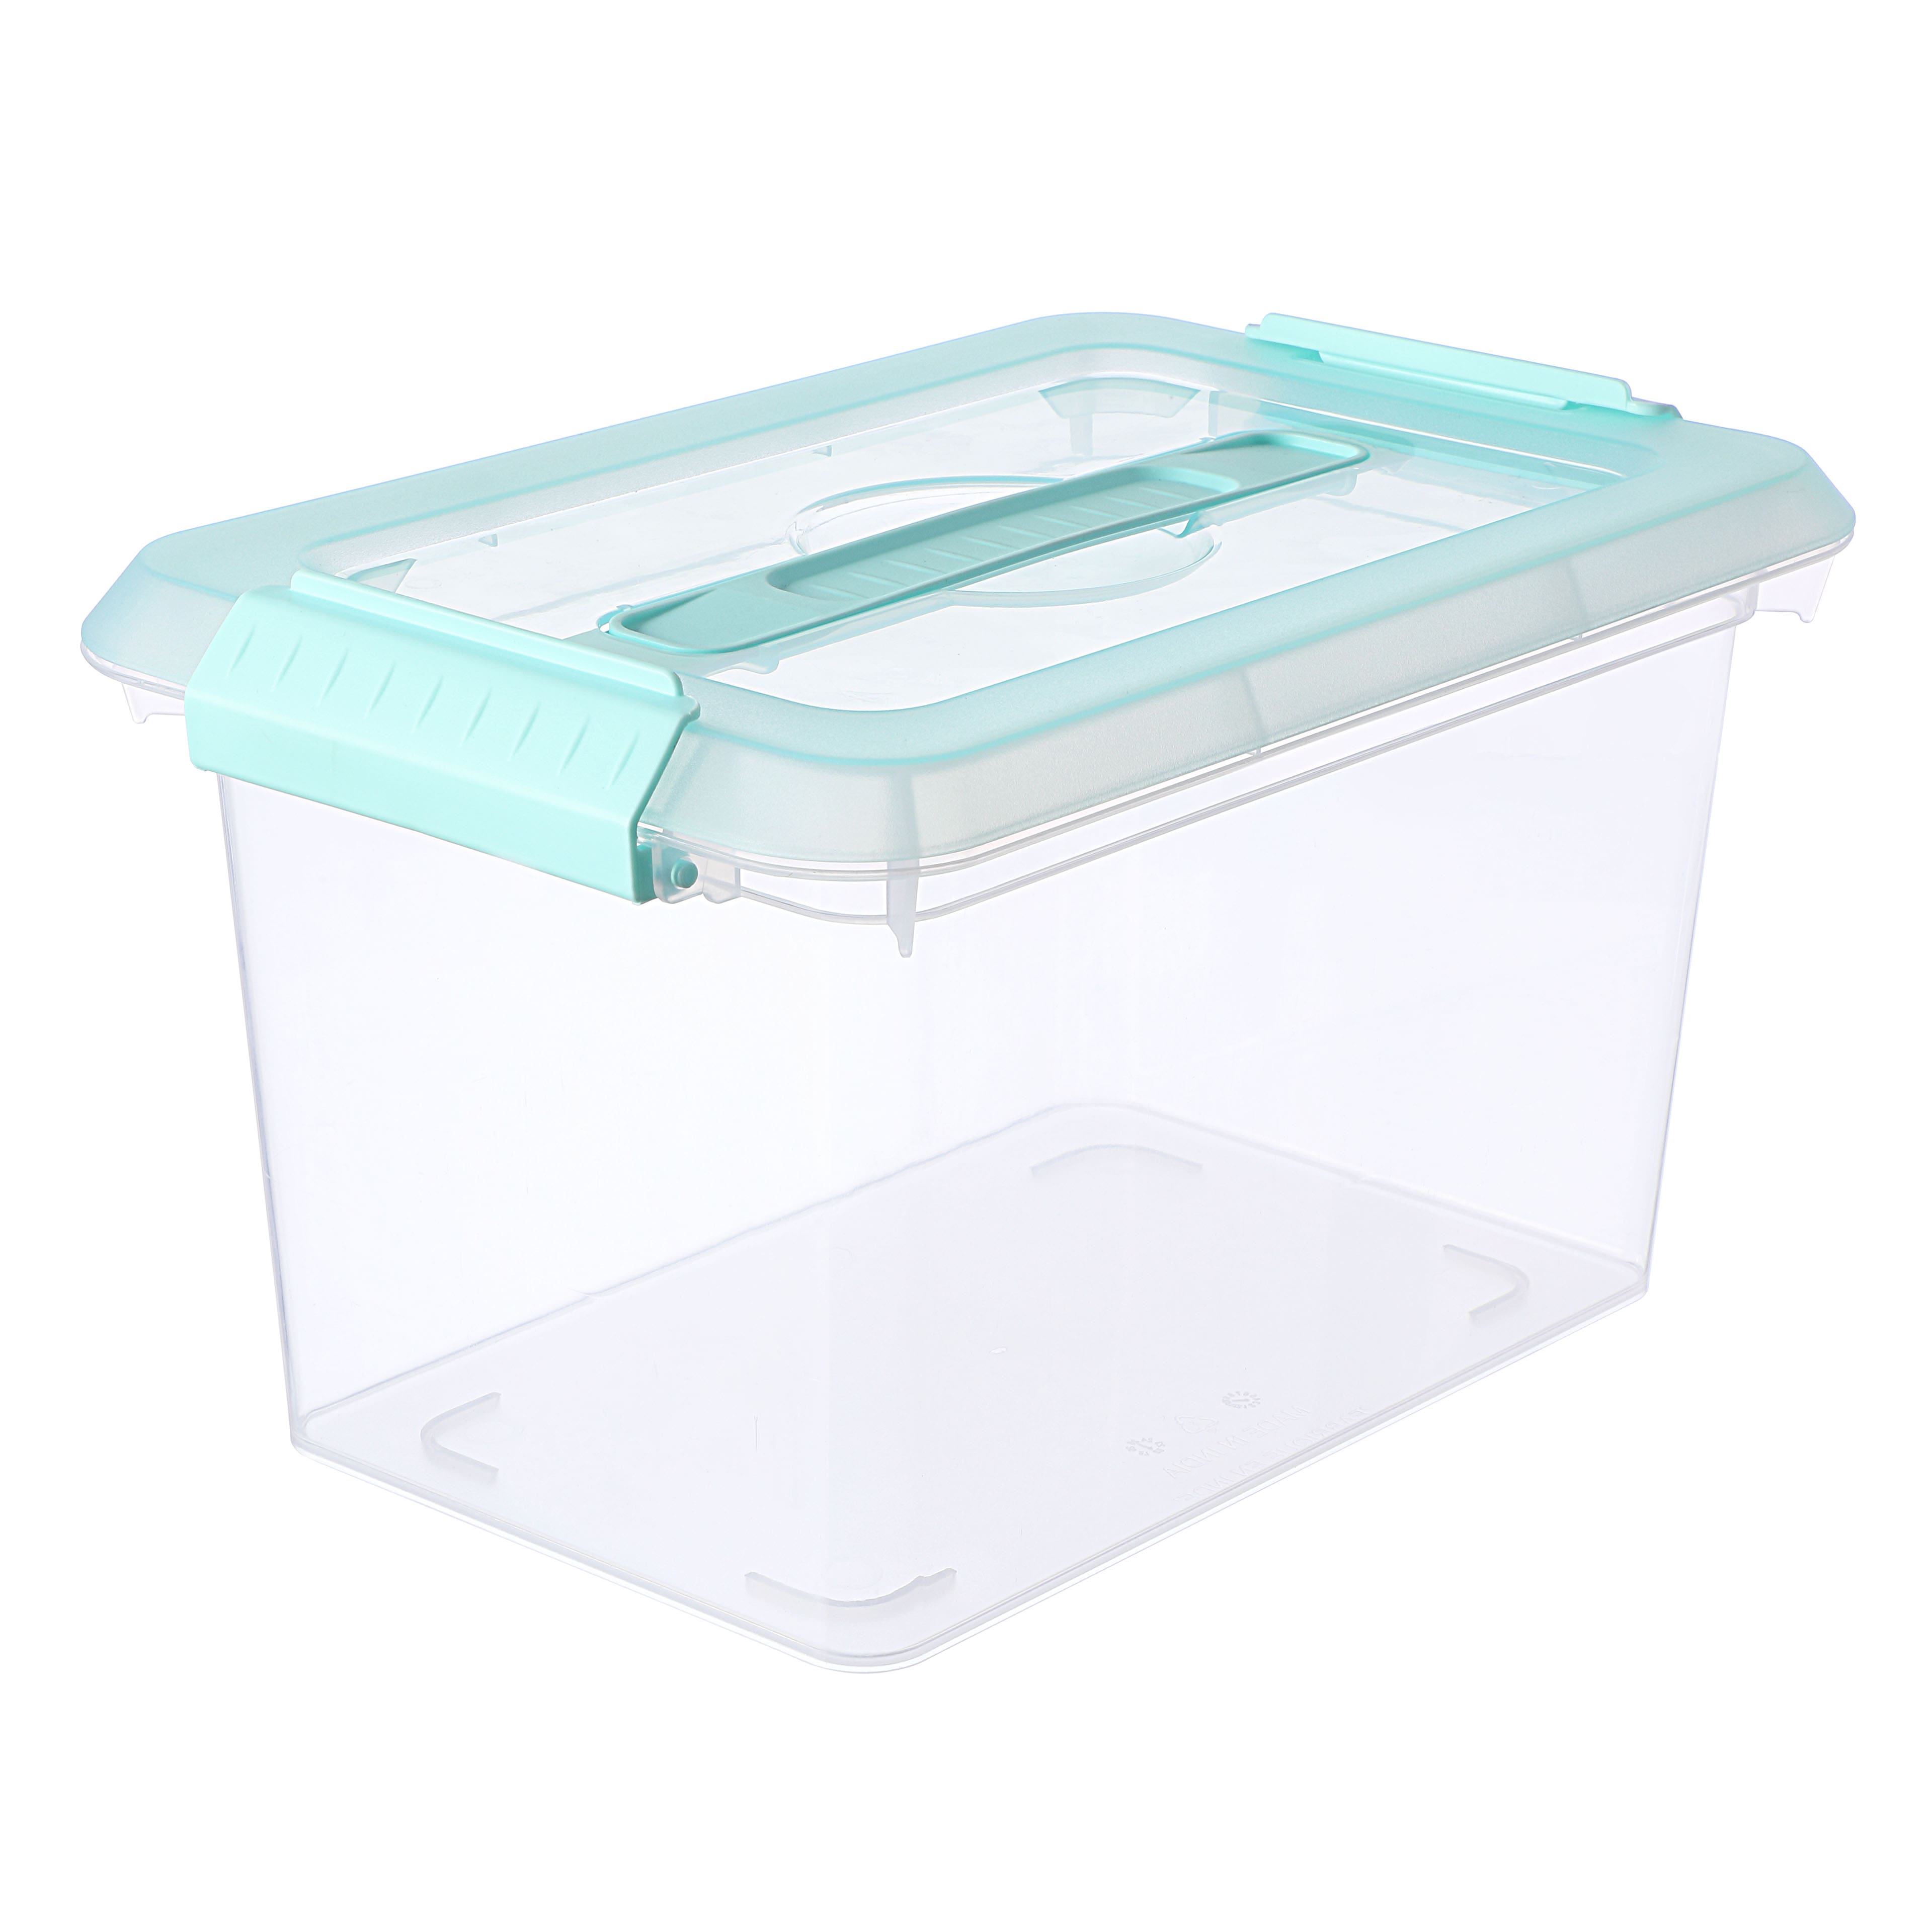 IRIS USA 50 Quart Clear Plastic Underbed Latched Stack Storage Container Box,  1 Piece - Pay Less Super Markets